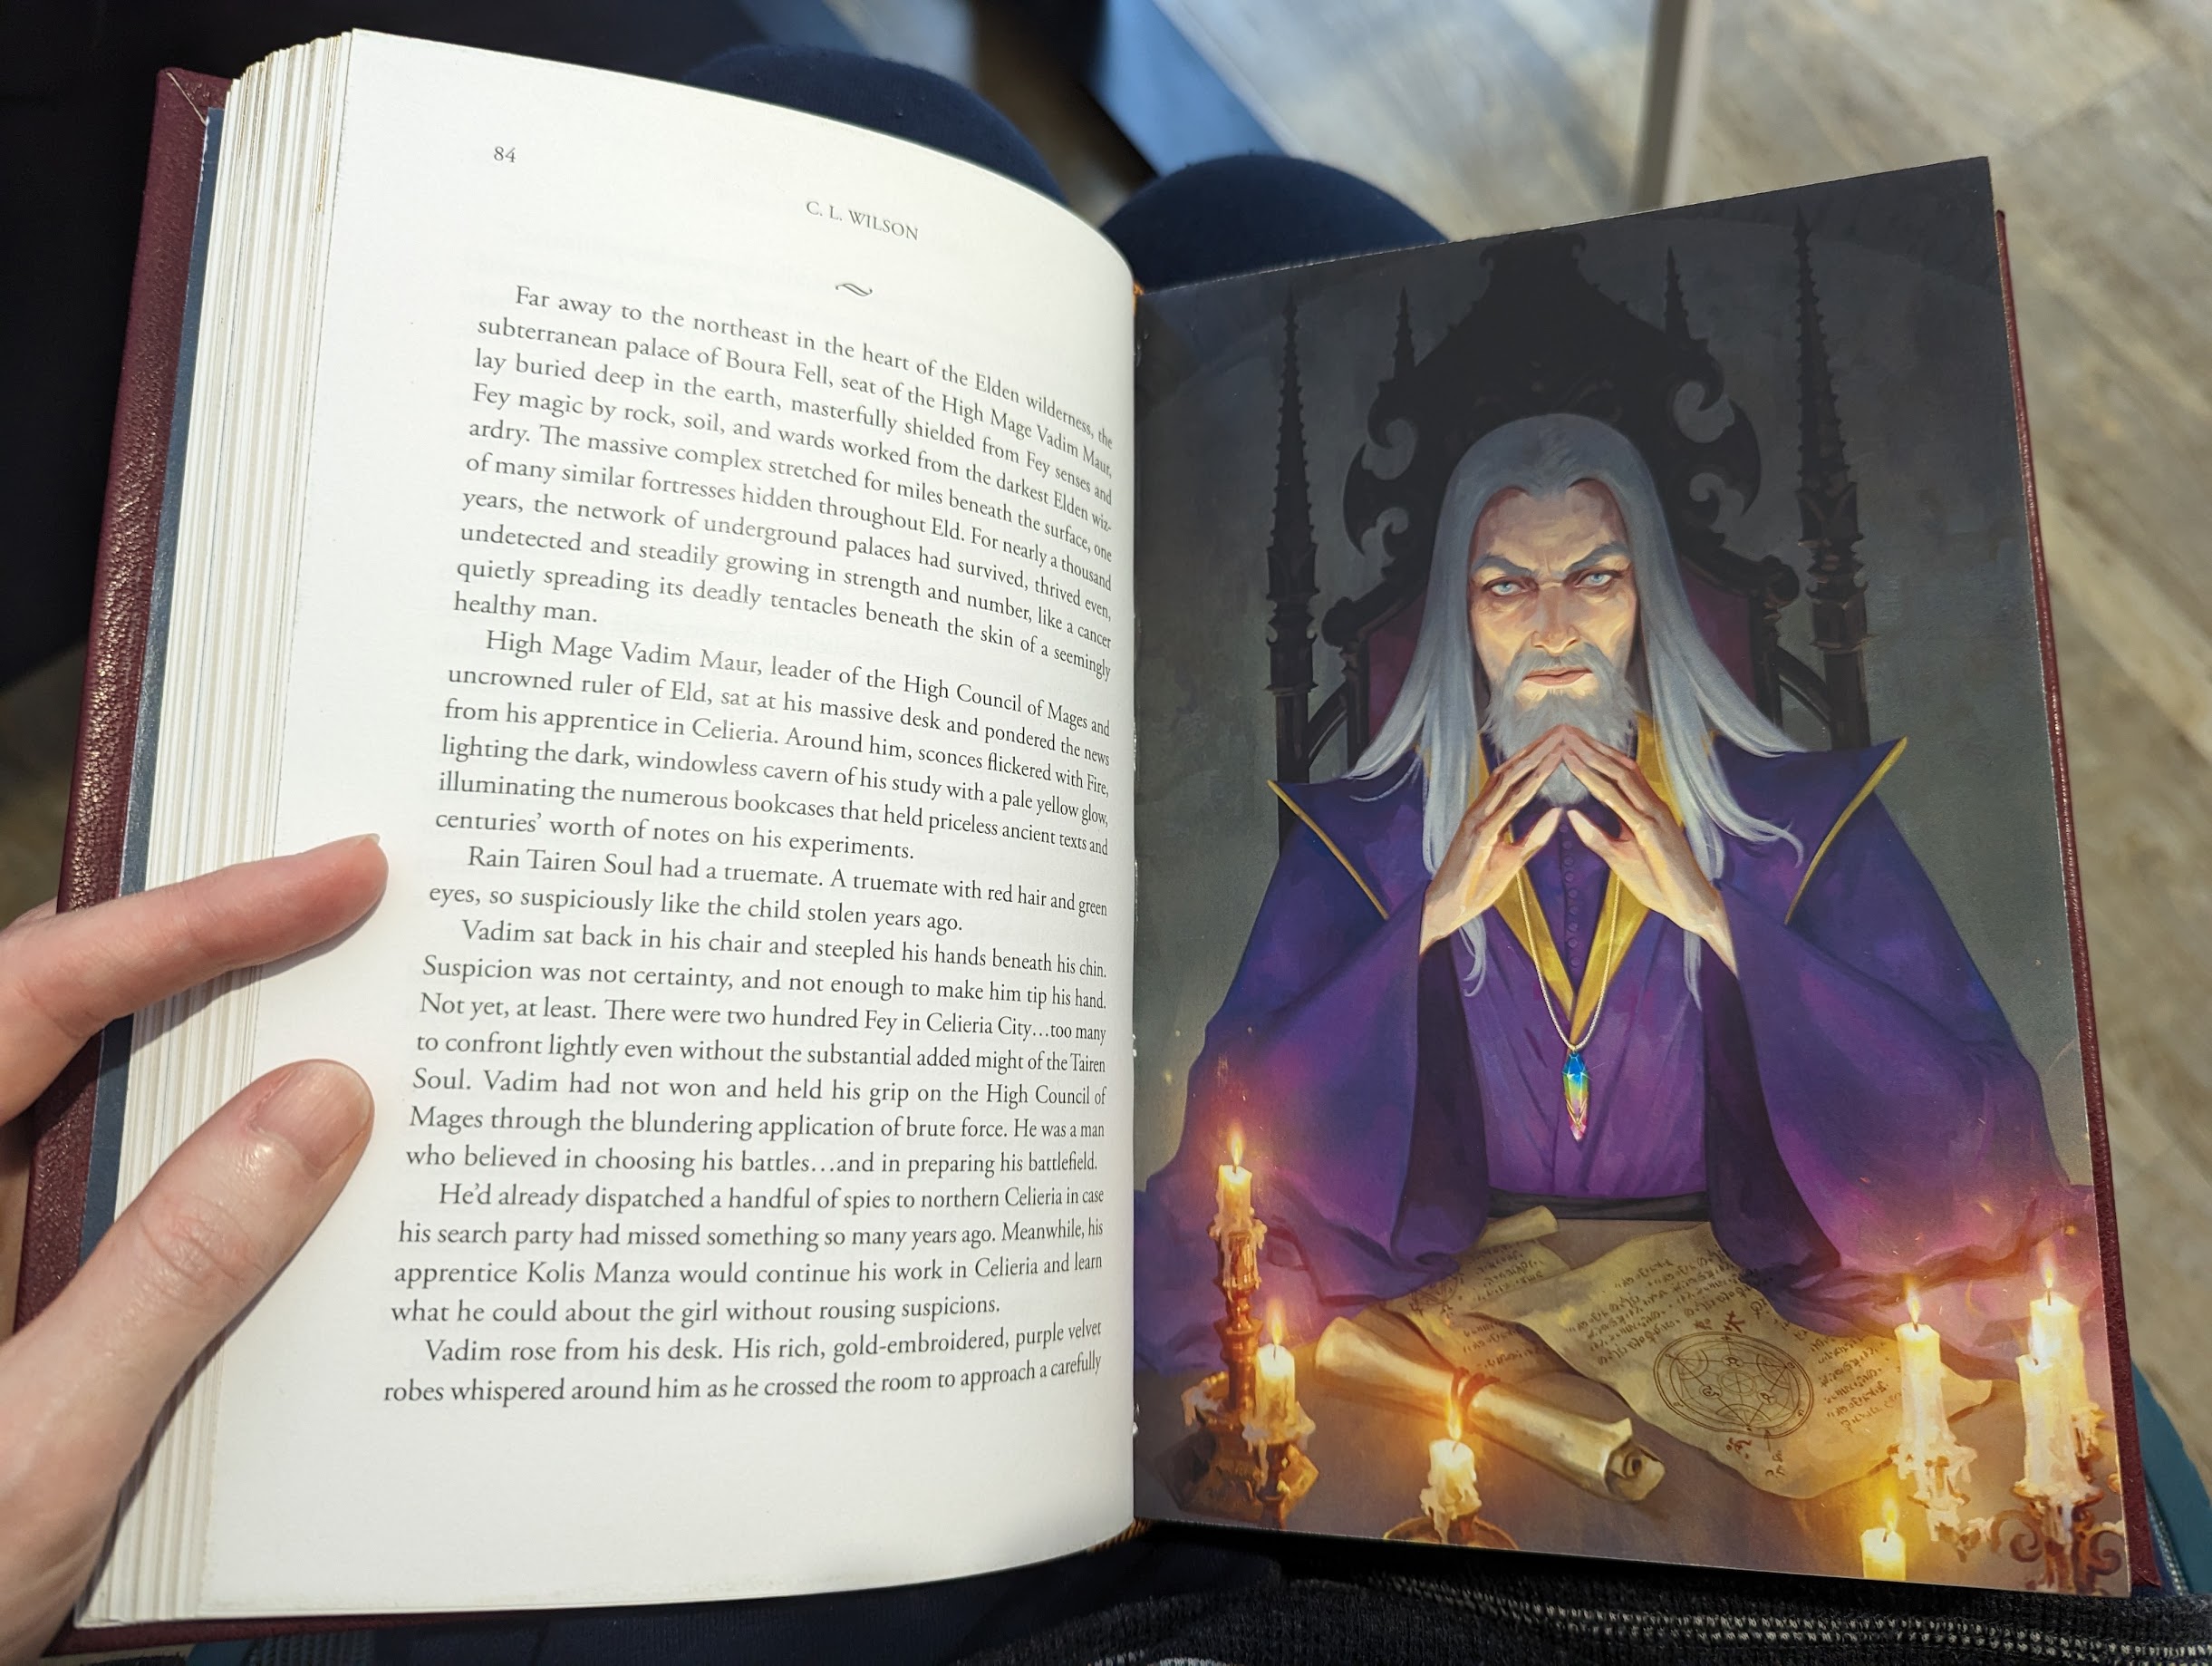 Photo of a full colour illustration inside a book. It depicts High Mage Vadim Maur from Tairen Soul. An evil looking mage with grey/white hair and purple robes. He's sitting at a desk containing various scrolls and candles.